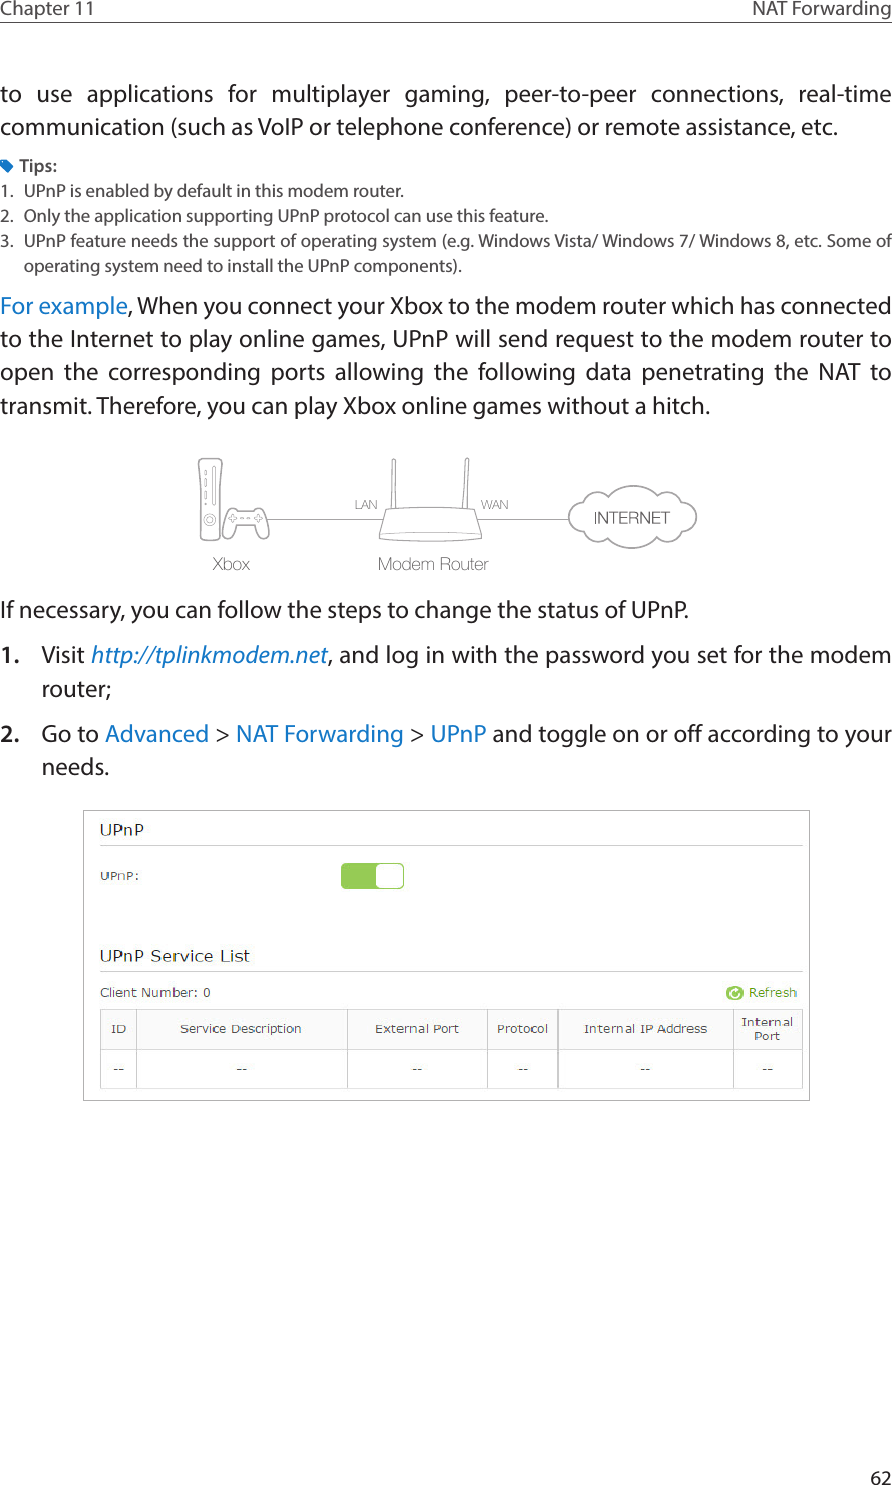 62Chapter 11 NAT Forwardingto use applications for multiplayer gaming, peer-to-peer connections, real-time communication (such as VoIP or telephone conference) or remote assistance, etc.Tips:1.  UPnP is enabled by default in this modem router.2.  Only the application supporting UPnP protocol can use this feature.3.  UPnP feature needs the support of operating system (e.g. Windows Vista/ Windows 7/ Windows 8, etc. Some of operating system need to install the UPnP components).For example, When you connect your Xbox to the modem router which has connected to the Internet to play online games, UPnP will send request to the modem router to open the corresponding ports allowing the following data penetrating the NAT to transmit. Therefore, you can play Xbox online games without a hitch.Modem RouterXboxLAN WANIf necessary, you can follow the steps to change the status of UPnP.1.  Visit http://tplinkmodem.net, and log in with the password you set for the modem router;2.  Go to Advanced &gt; NAT Forwarding &gt; UPnP and toggle on or off according to your needs.